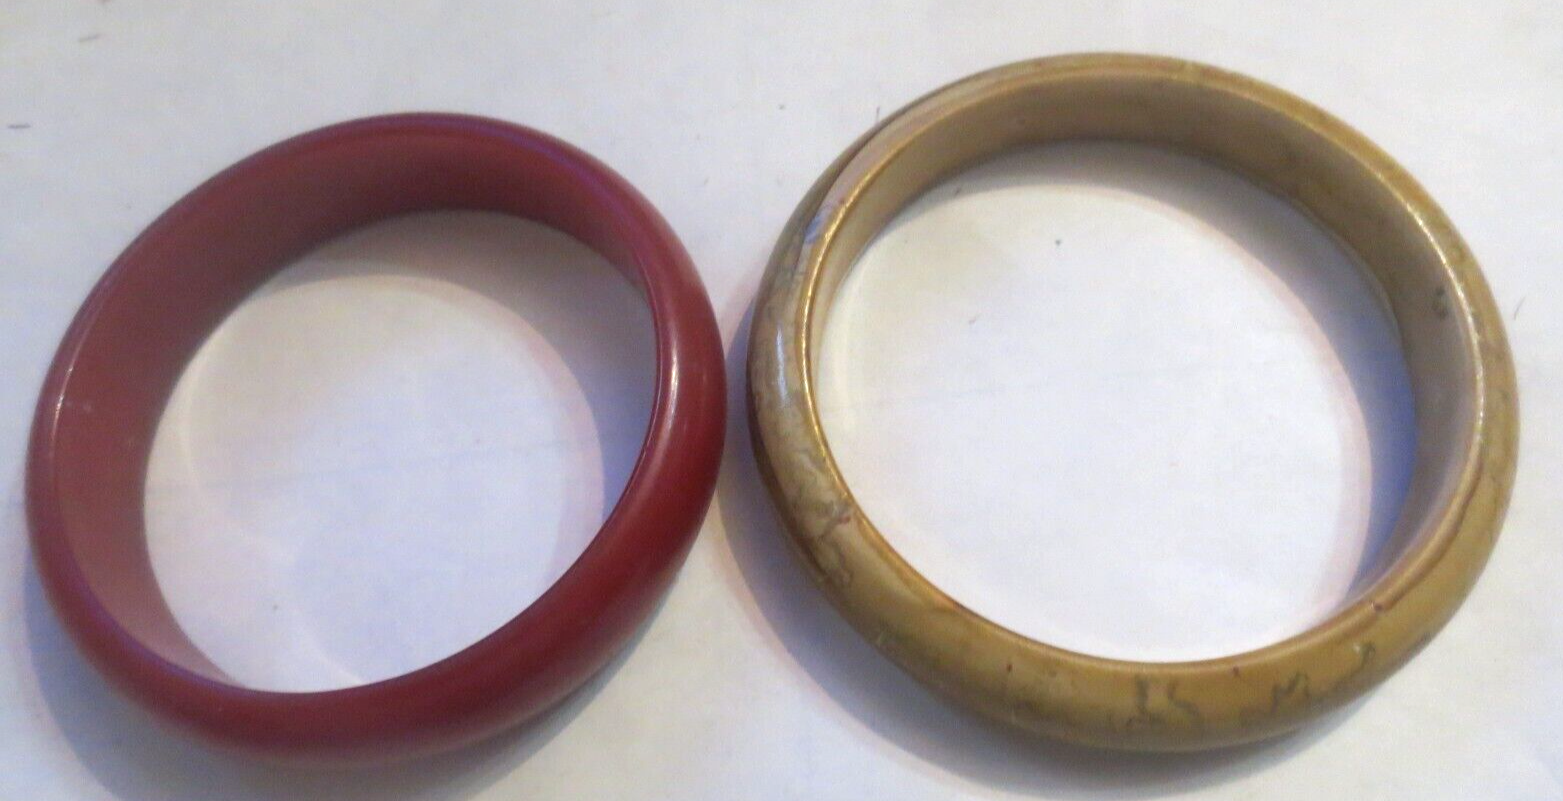 Primary image for 2 Vintage Bracelets Bakelite Plastic one Red & one multicolor butterscotch